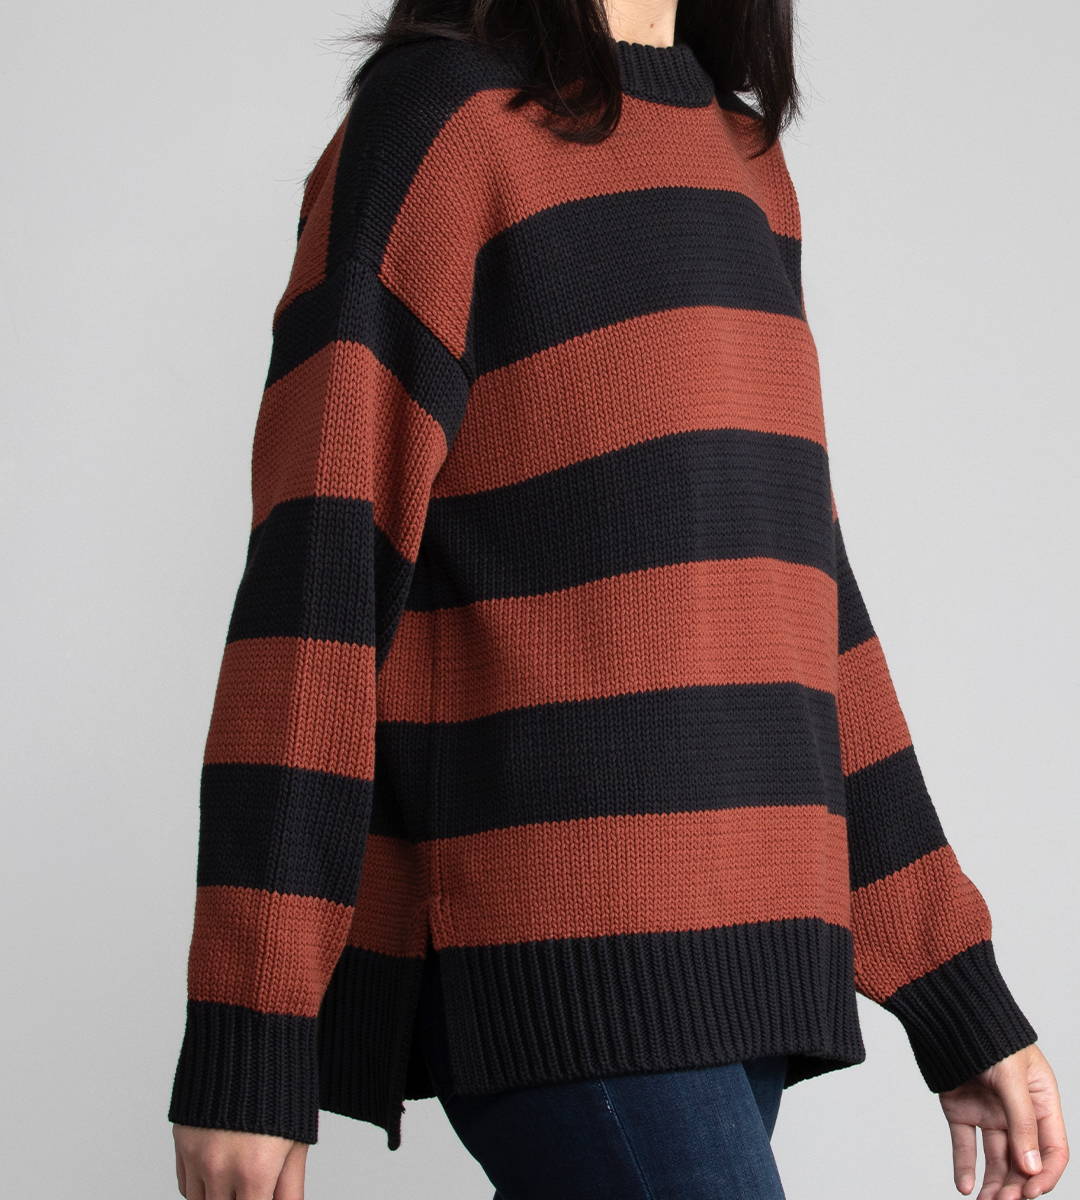 Close up image of a woman walking. She is wearing a black and red striped crew neck sweater.